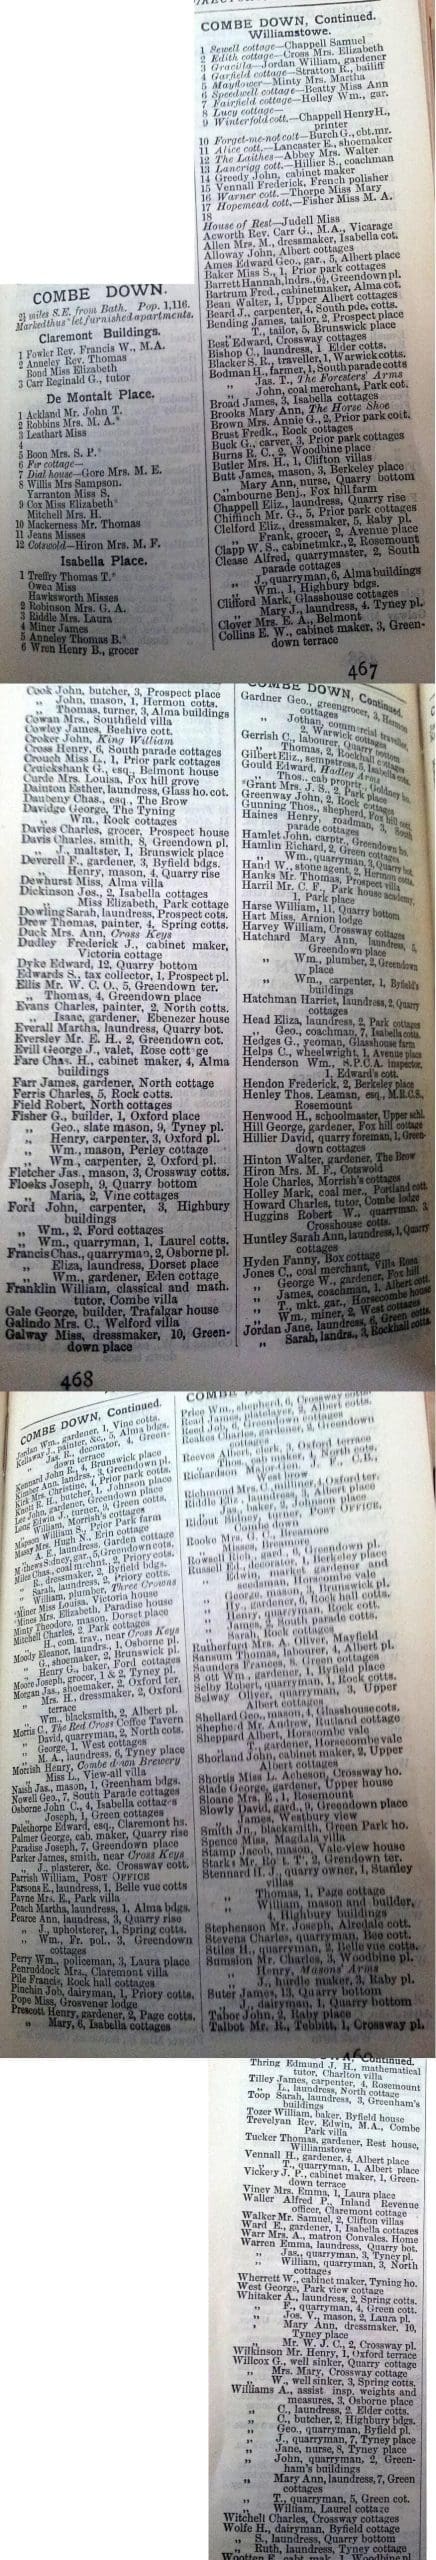 1886 Post Office Directory for Combe Down